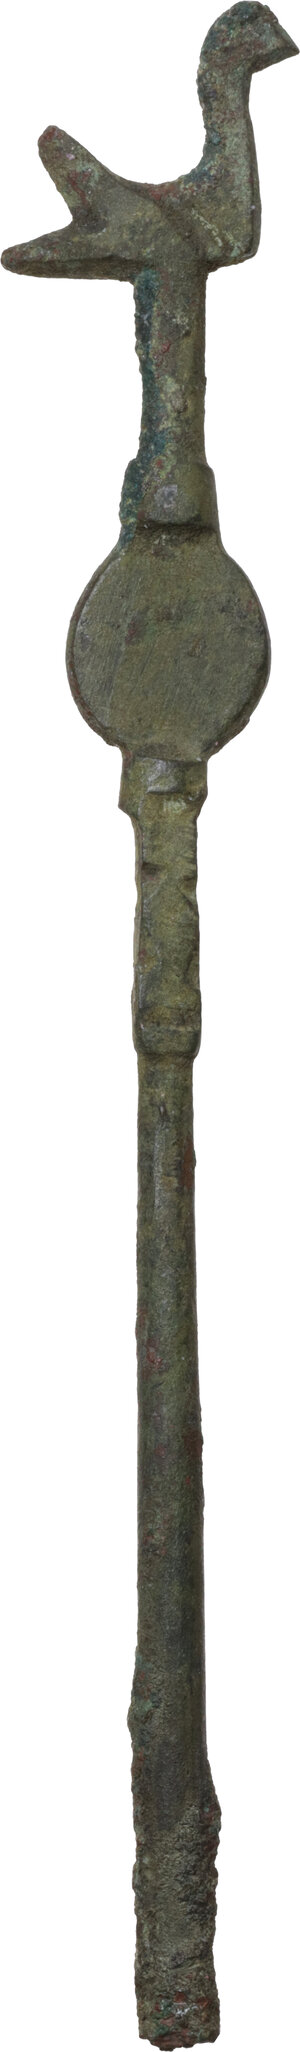 reverse: SMALL BRONZE ROD Roman period, c. 1st - 4th century AD. (?) Bronze rod with a round section stem, with a bird on the top (perhaps a dove) and a flat point towards the top, probably suitable for the handle of the instrument. Lenght: 112 mm